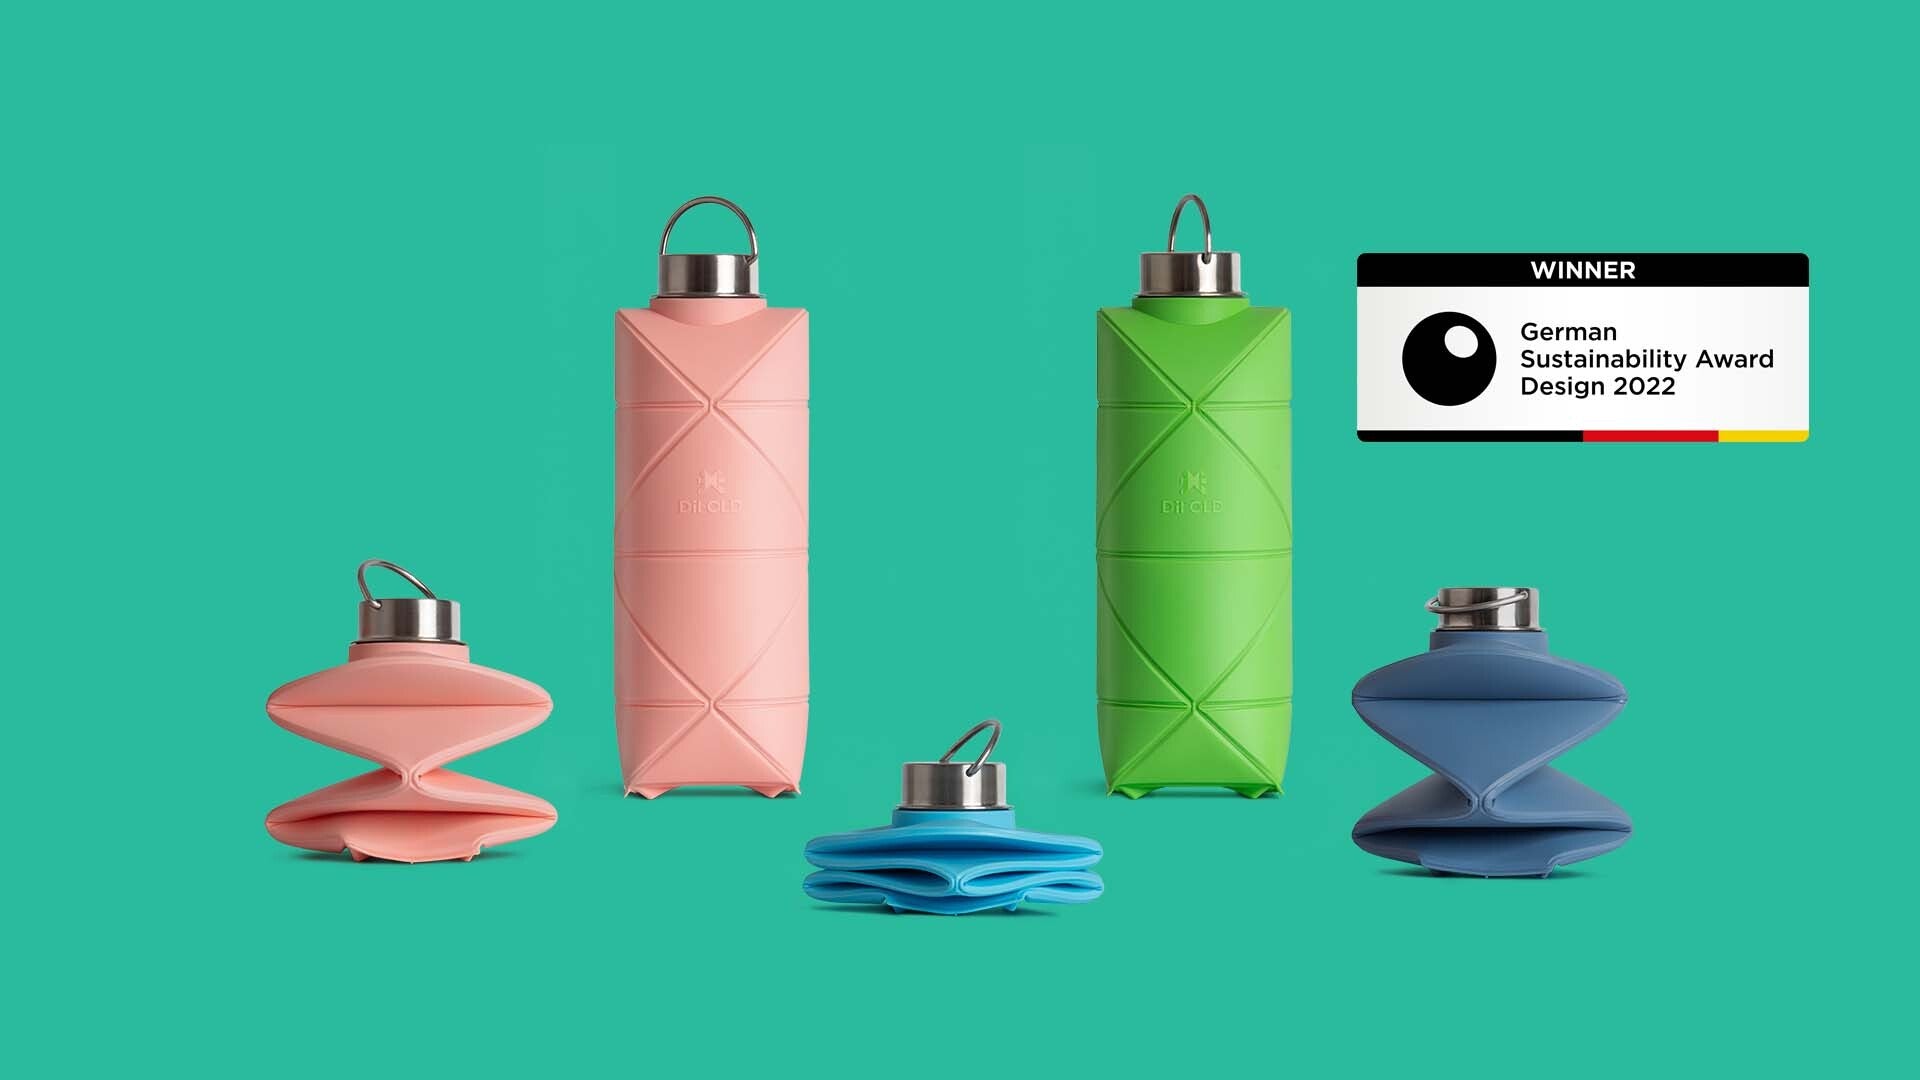 DiFOLD collapsible reusable Origami Bottle